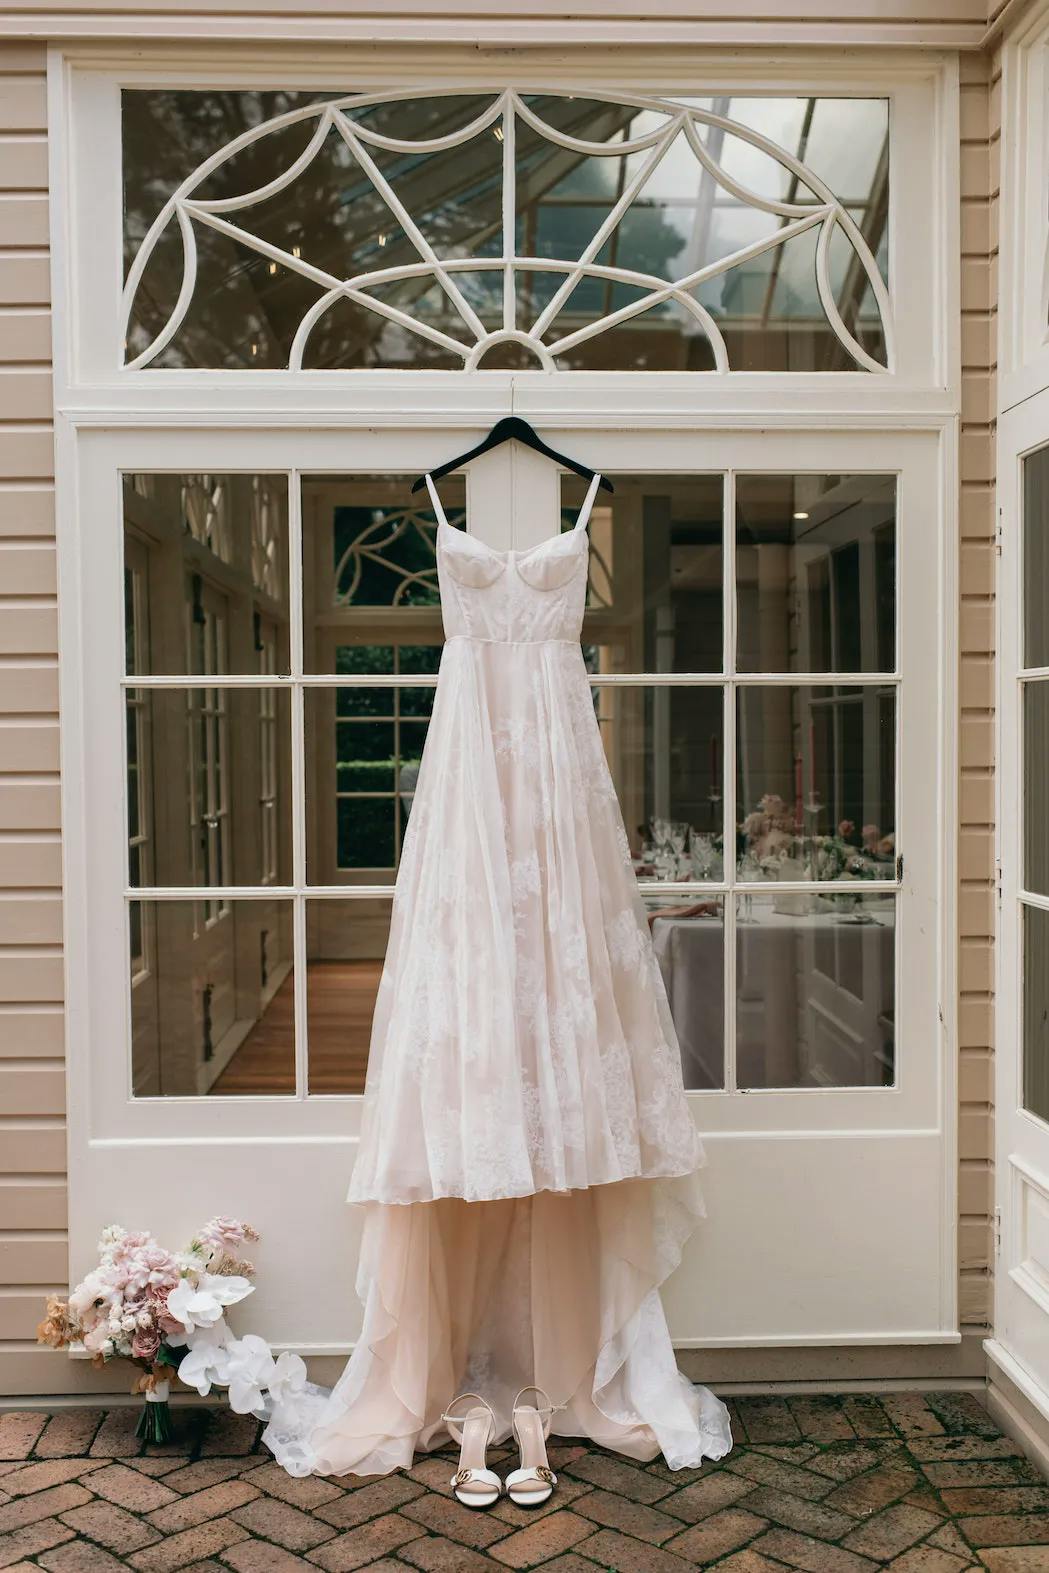 A white wedding dress is hanging from a window by thin straps, displayed in front of a glass door with decorative framing. Below the dress, a pair of white high-heeled shoes are placed on the ground next to a bouquet of pink and white flowers.